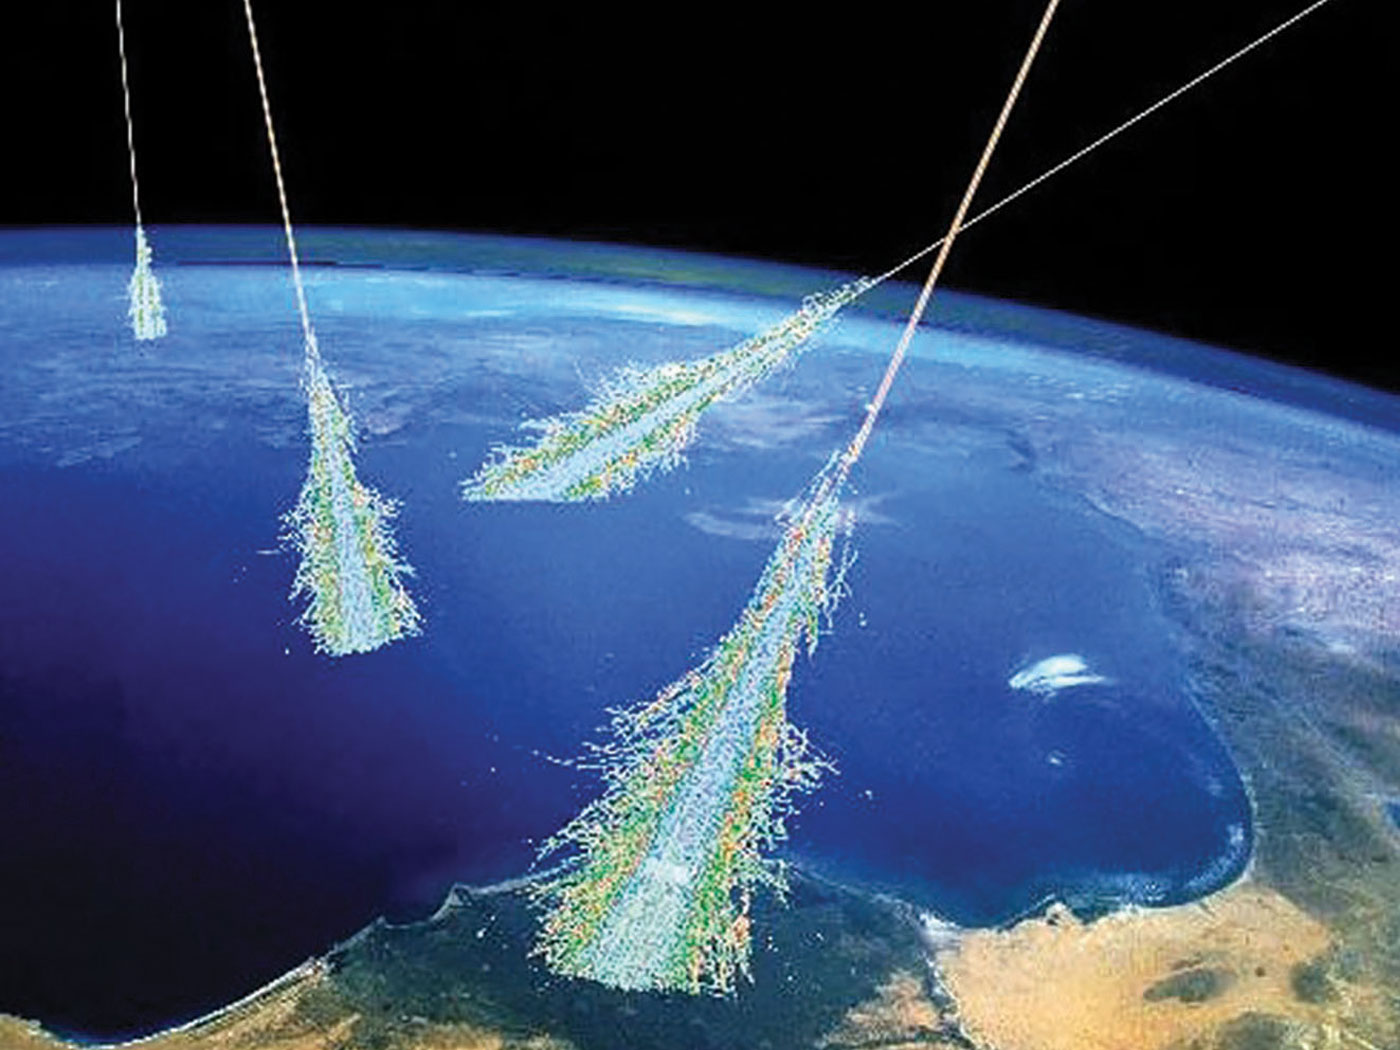 Cosmic Rays, Sunspots, and Climate Change, Part 2 The Institute for